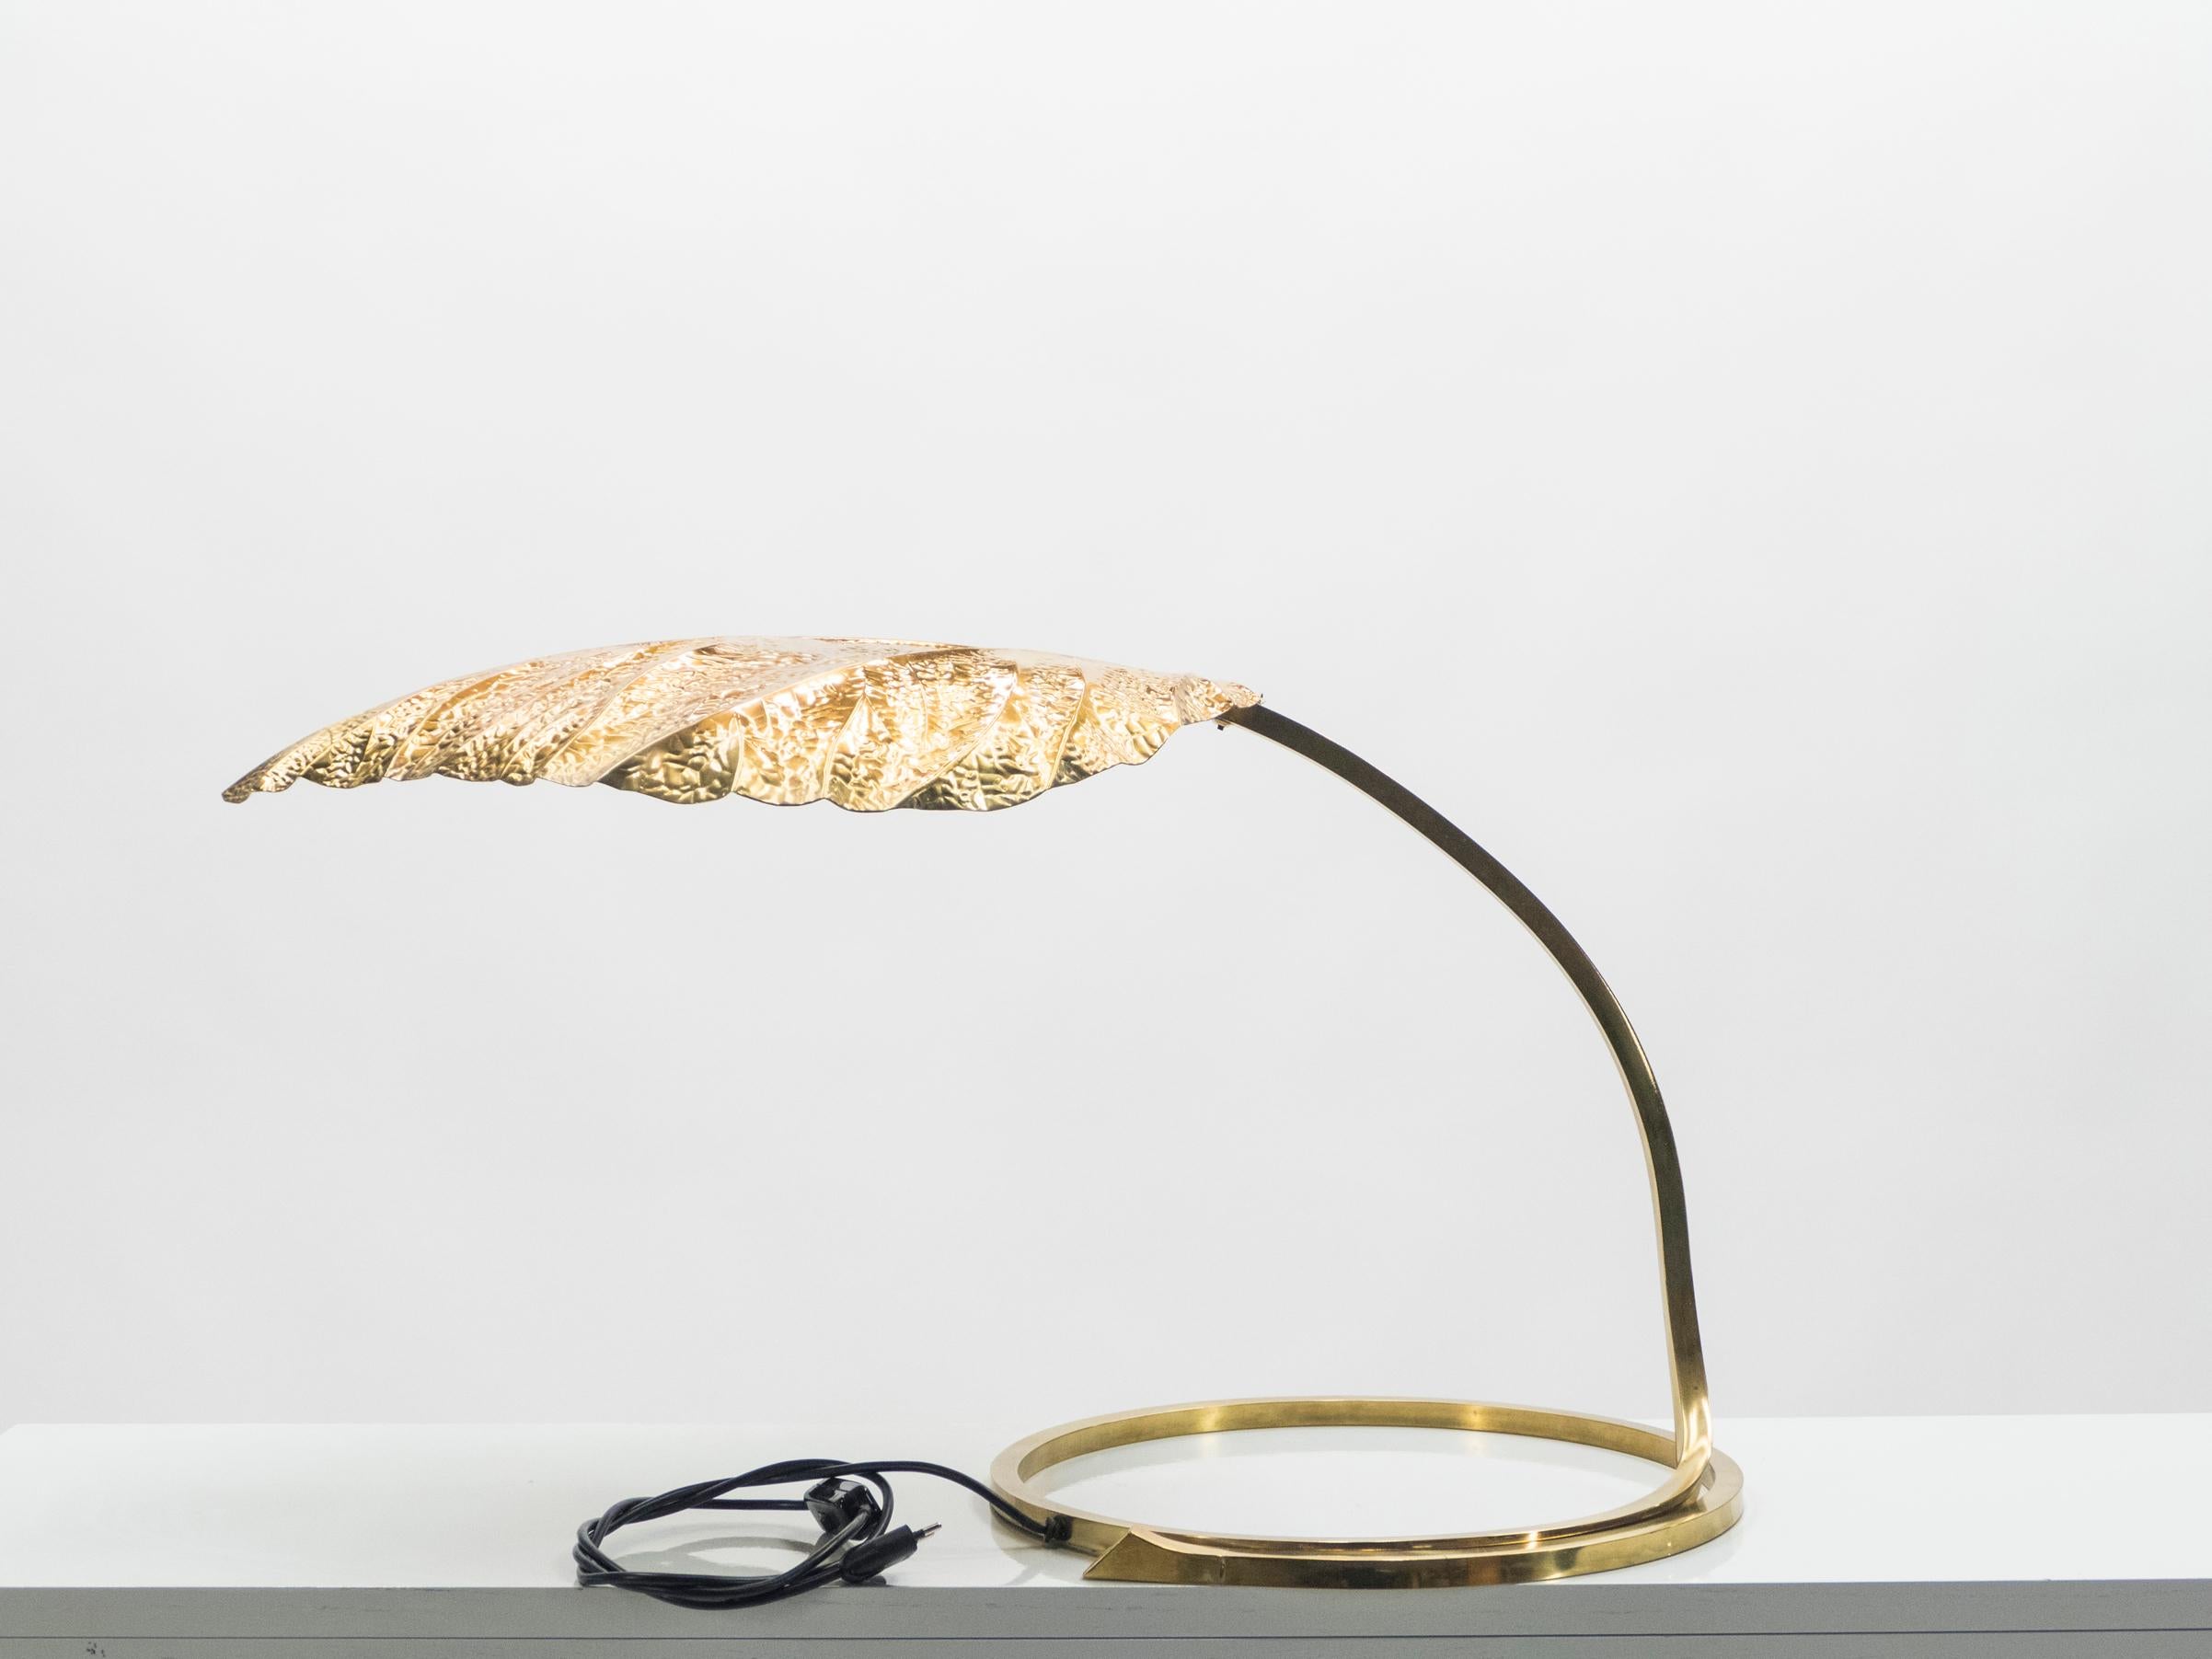 This iconic single leaf Rhubarb table lamp by Tommaso Barbi was produced by Carlo Giorgi in Italy in the 1970s. The circular brass frame sweeps upwards from the base to support the large, decorative, hammered brass leaf. The handcrafted element